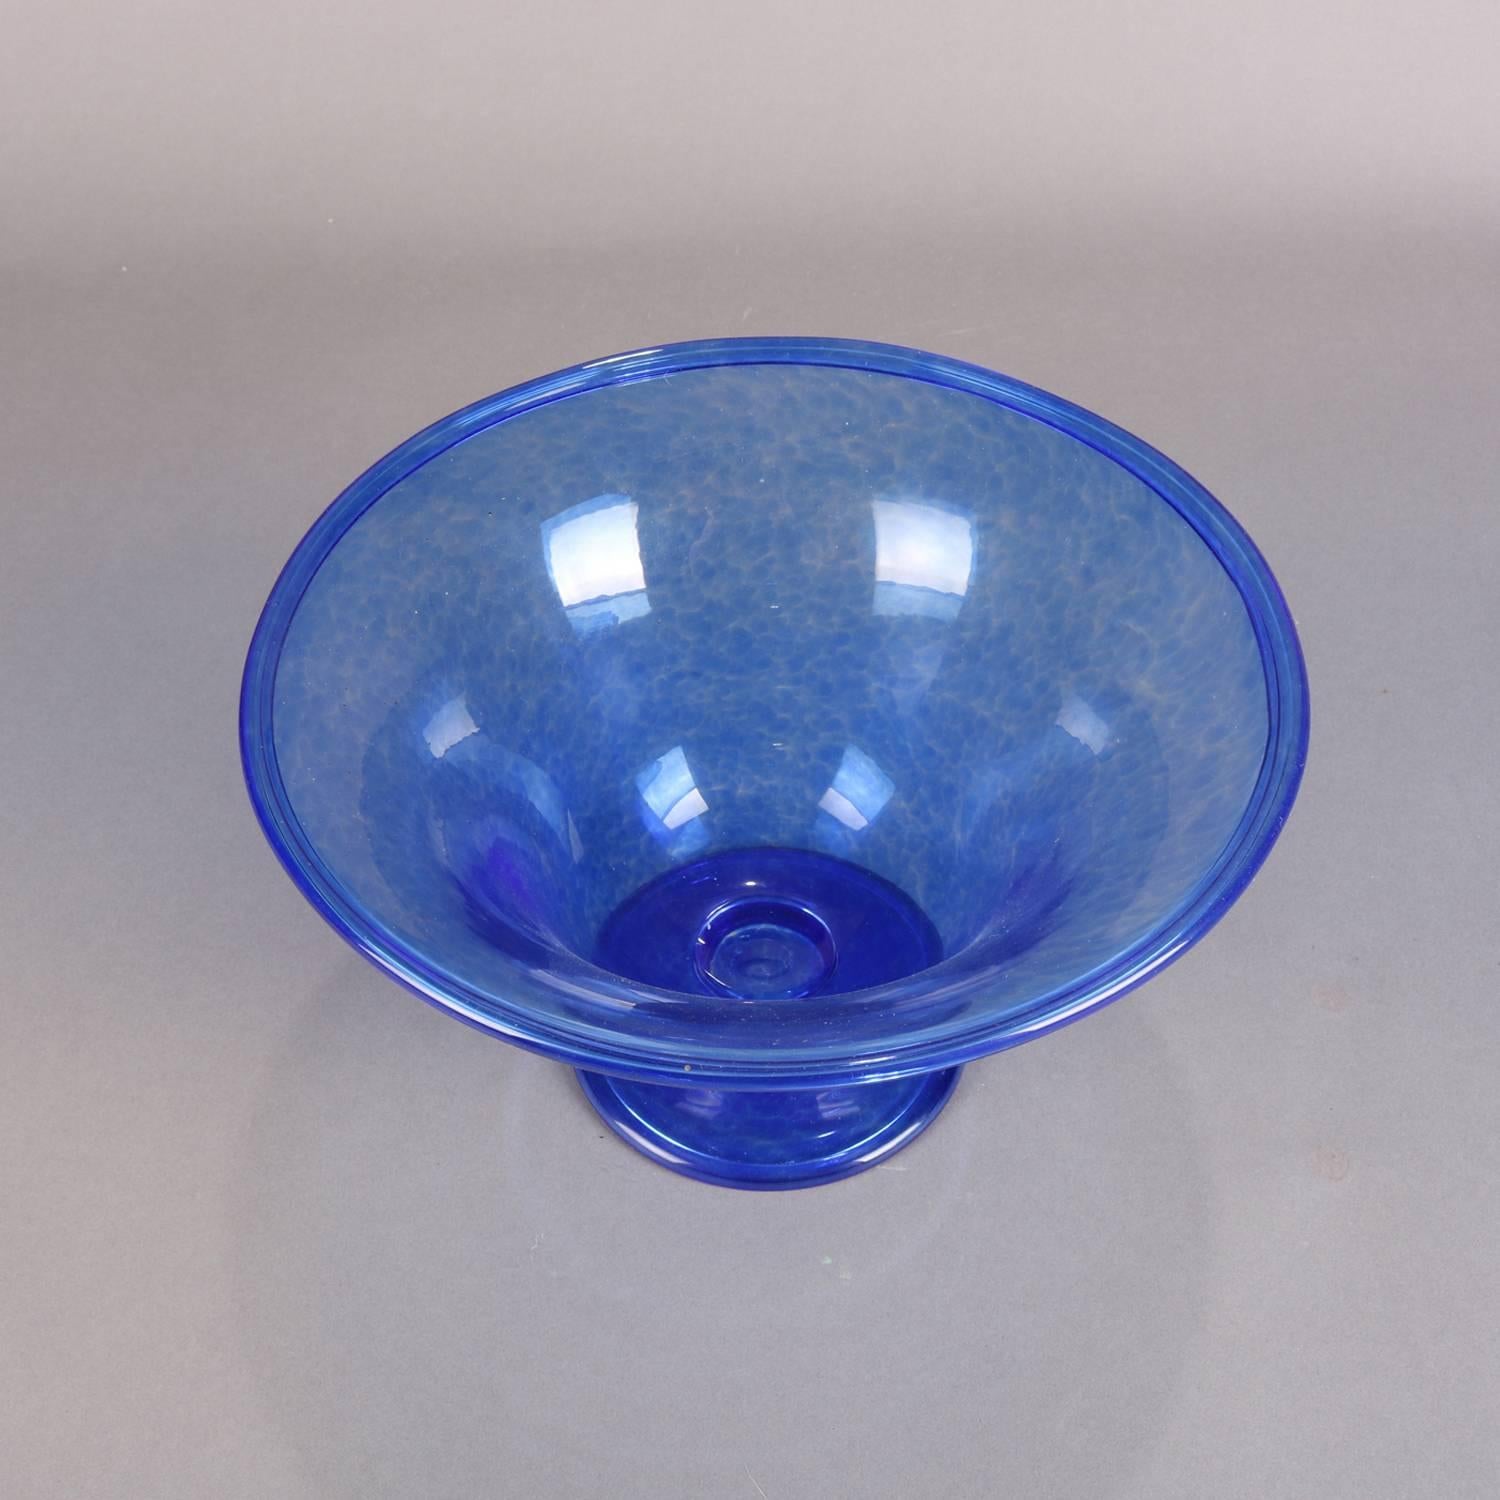 Cobalt blue blown glass footed bowl by Corning Museum of Glass features flared form and is signed on base CMOG, home of Steuben, 20th century

Measures: 5.5